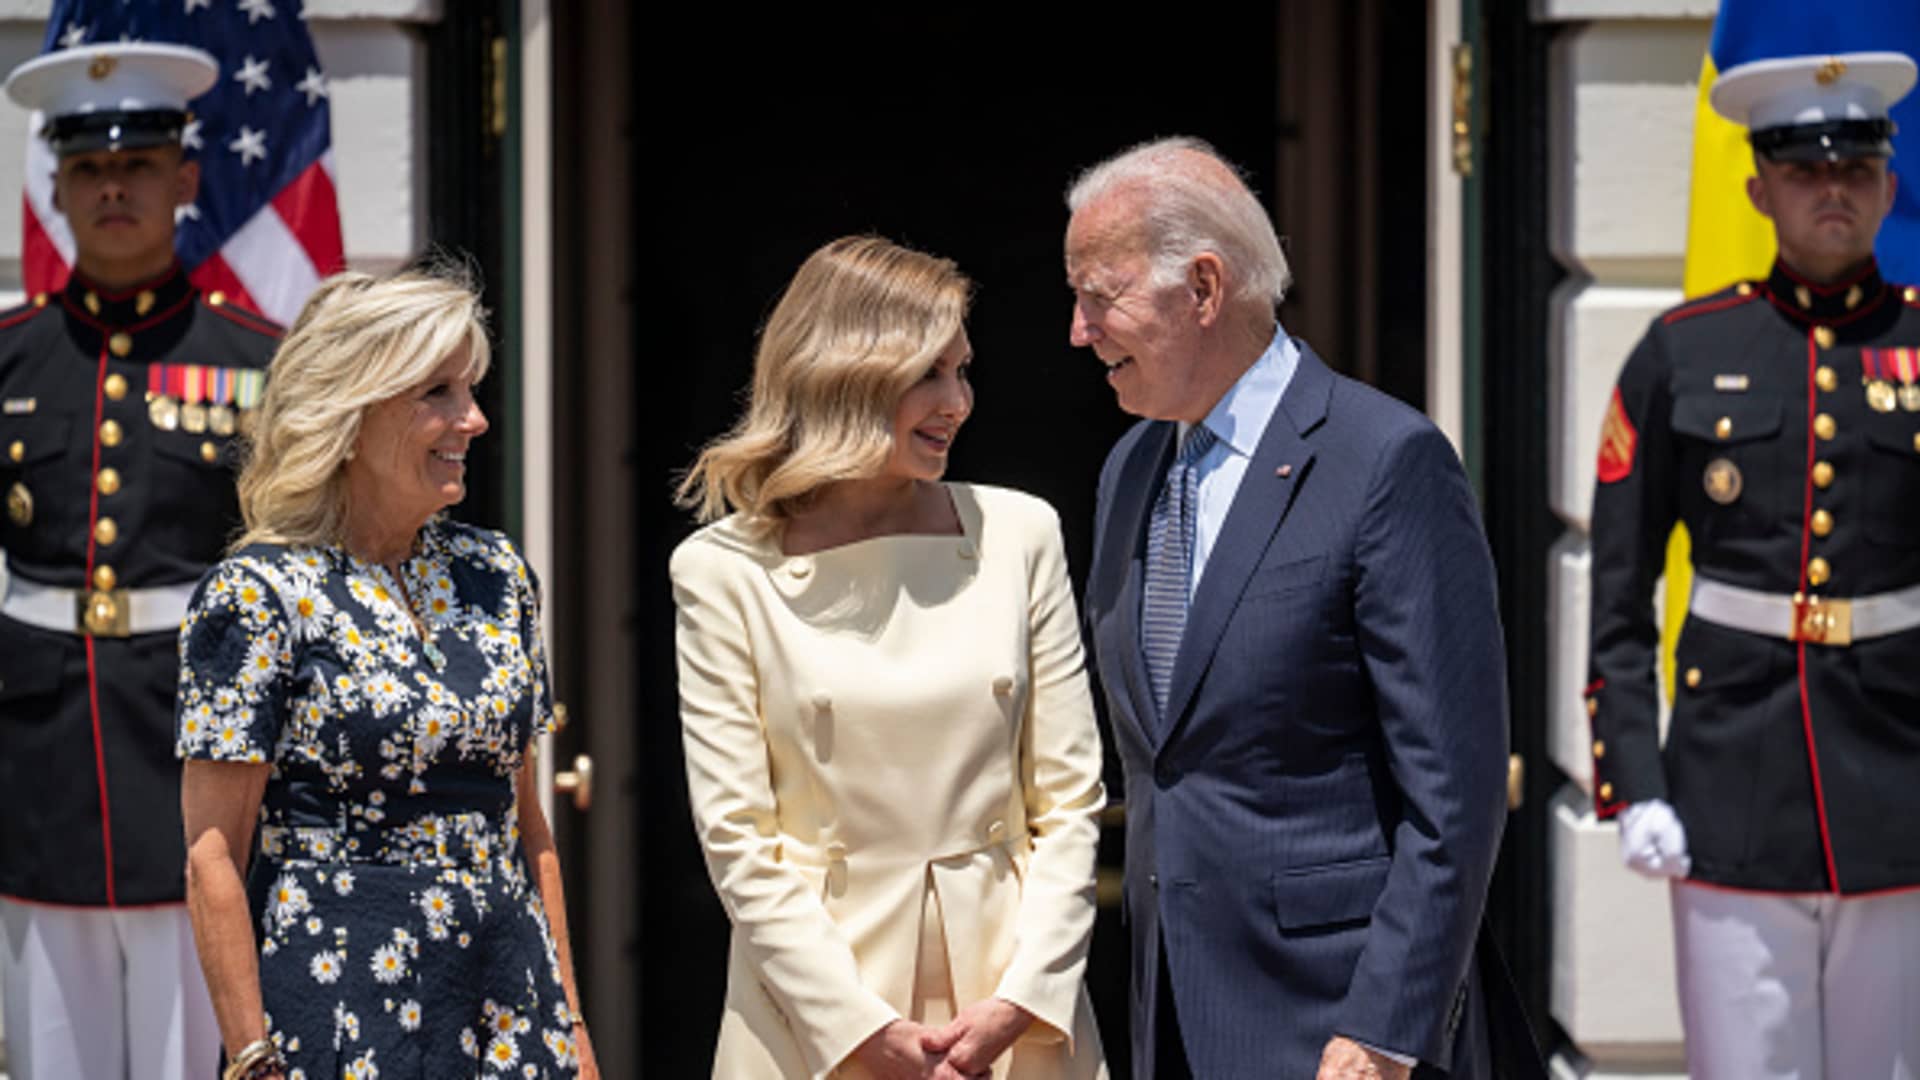 U.S. first lady Jill Biden, first lady of Ukraine Olena Zelenska and U.S. President Joe Biden pose for photos as Zelenska arrives on the South Lawn of the White House on July 19, 2022, in Washington, DC. Zelenska is in the United States for a series of high-level meetings and an address to Congress.